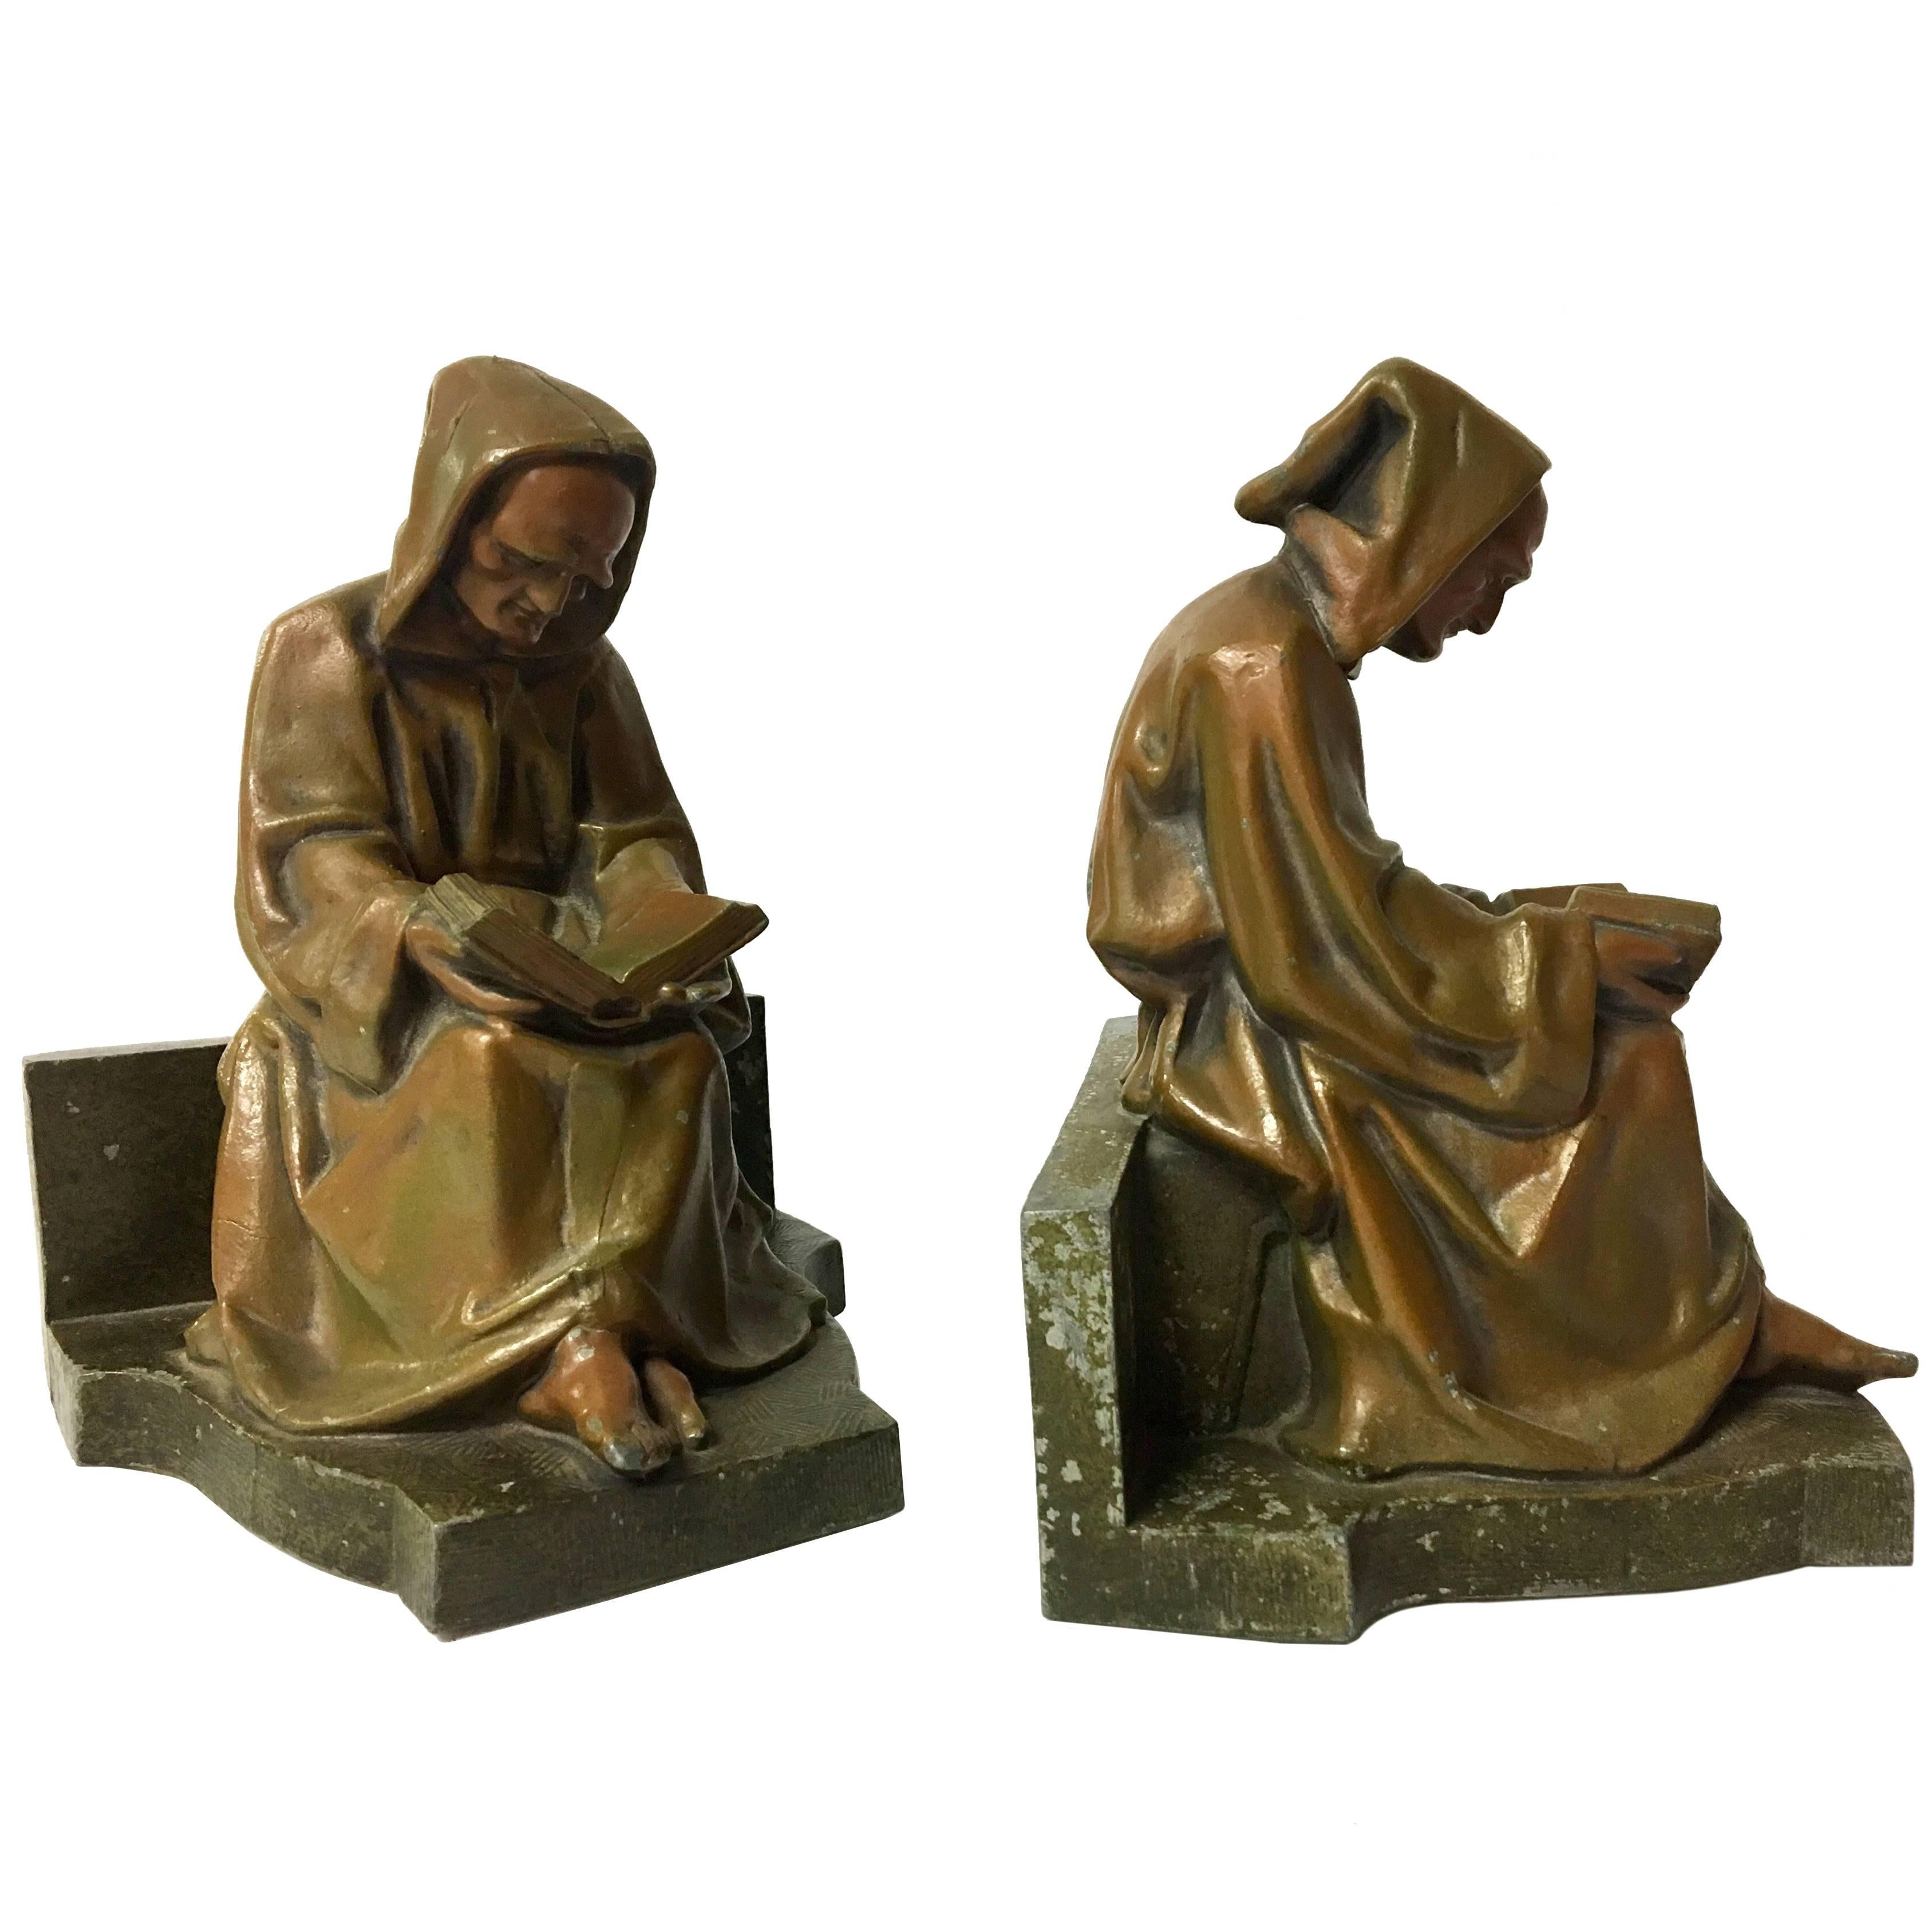 Antique Pair of Monk Reading/Scholar Bookends in Bronze Finish